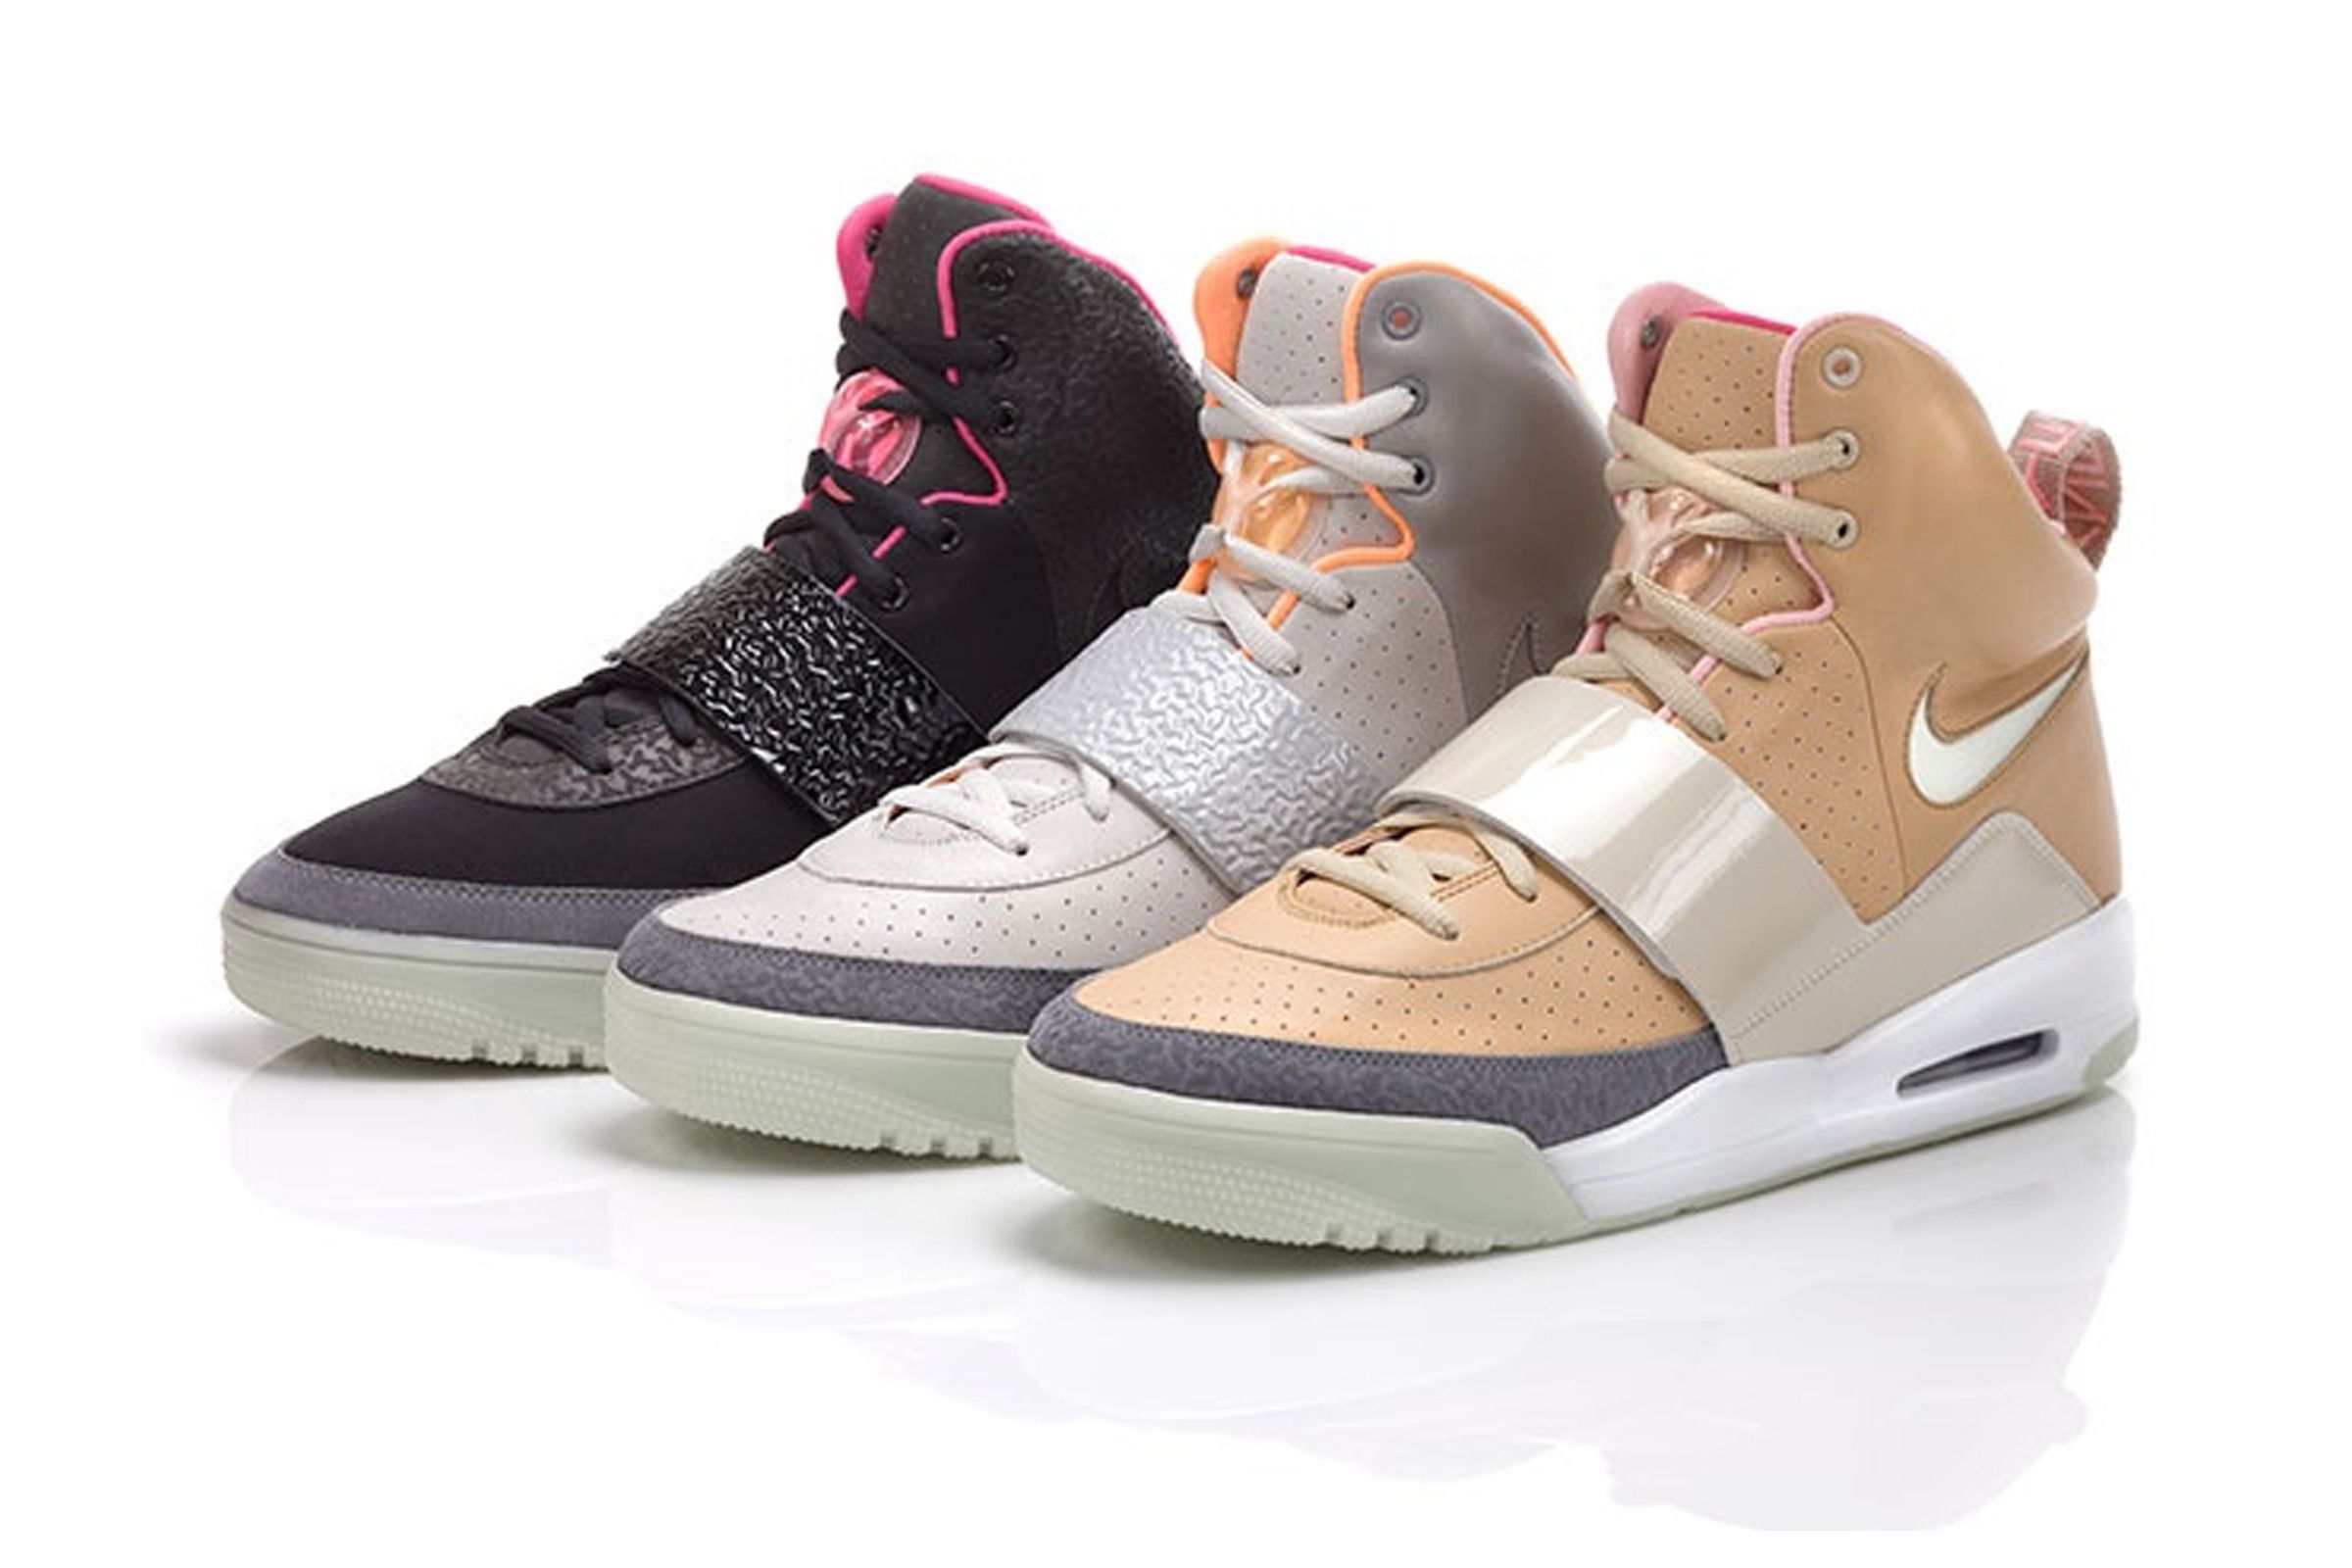 The Air Yeezy 1 Net Tan Came out 10 Years Ago Today : r/Sneakers